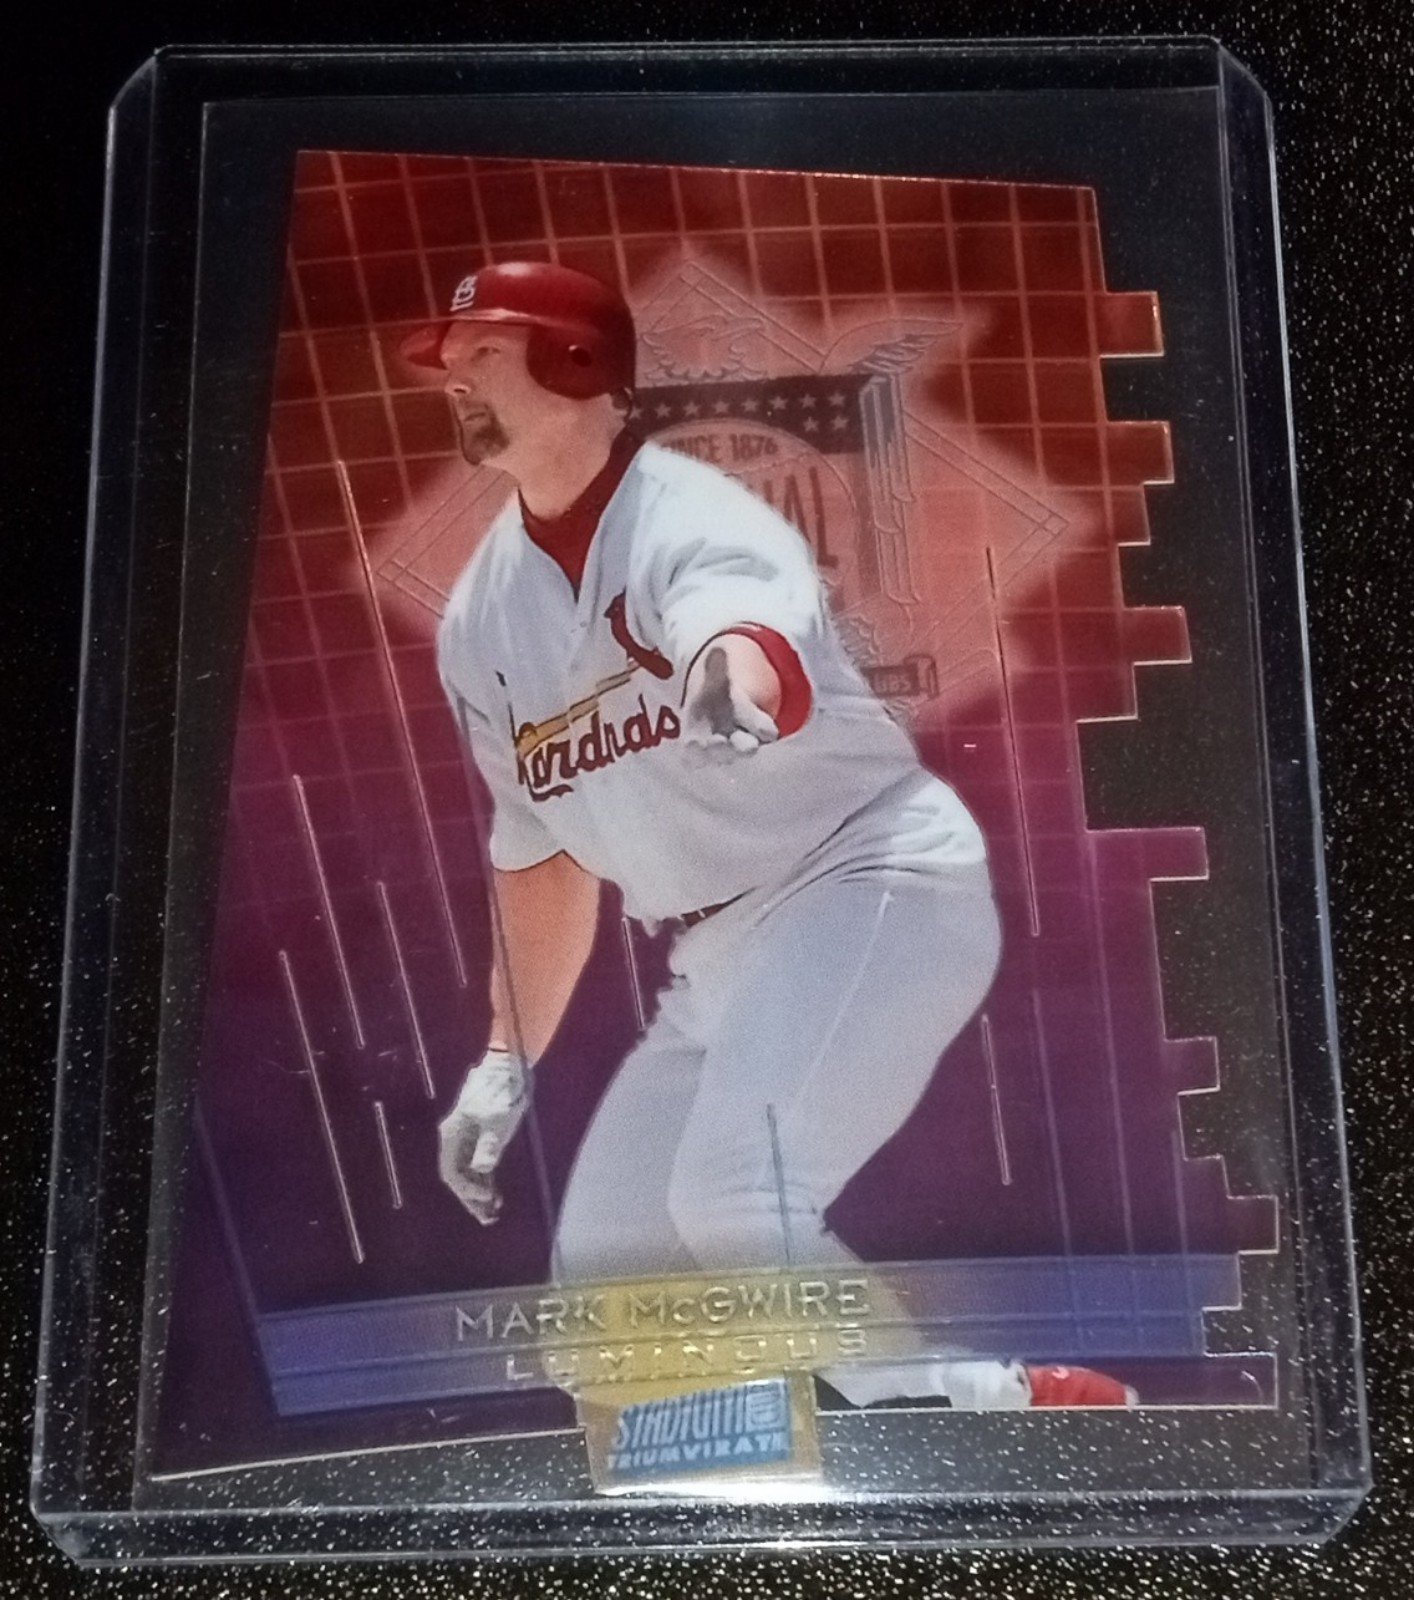 St. Louis Cardinals Mark McGwire Card 28uwF2fRS